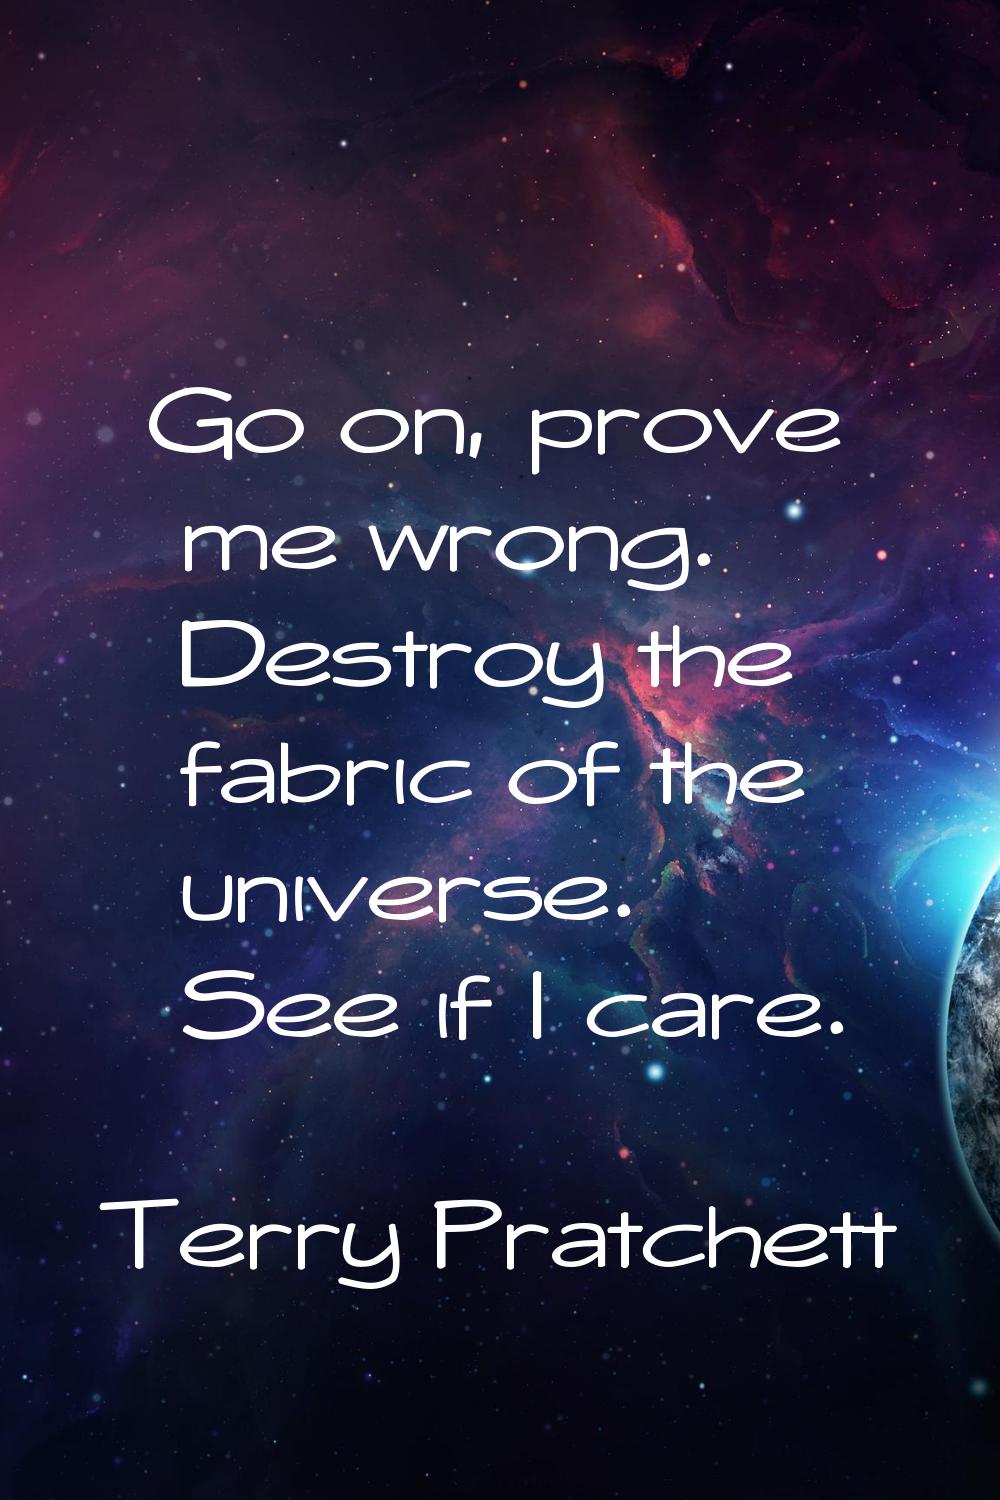 Go on, prove me wrong. Destroy the fabric of the universe. See if I care.